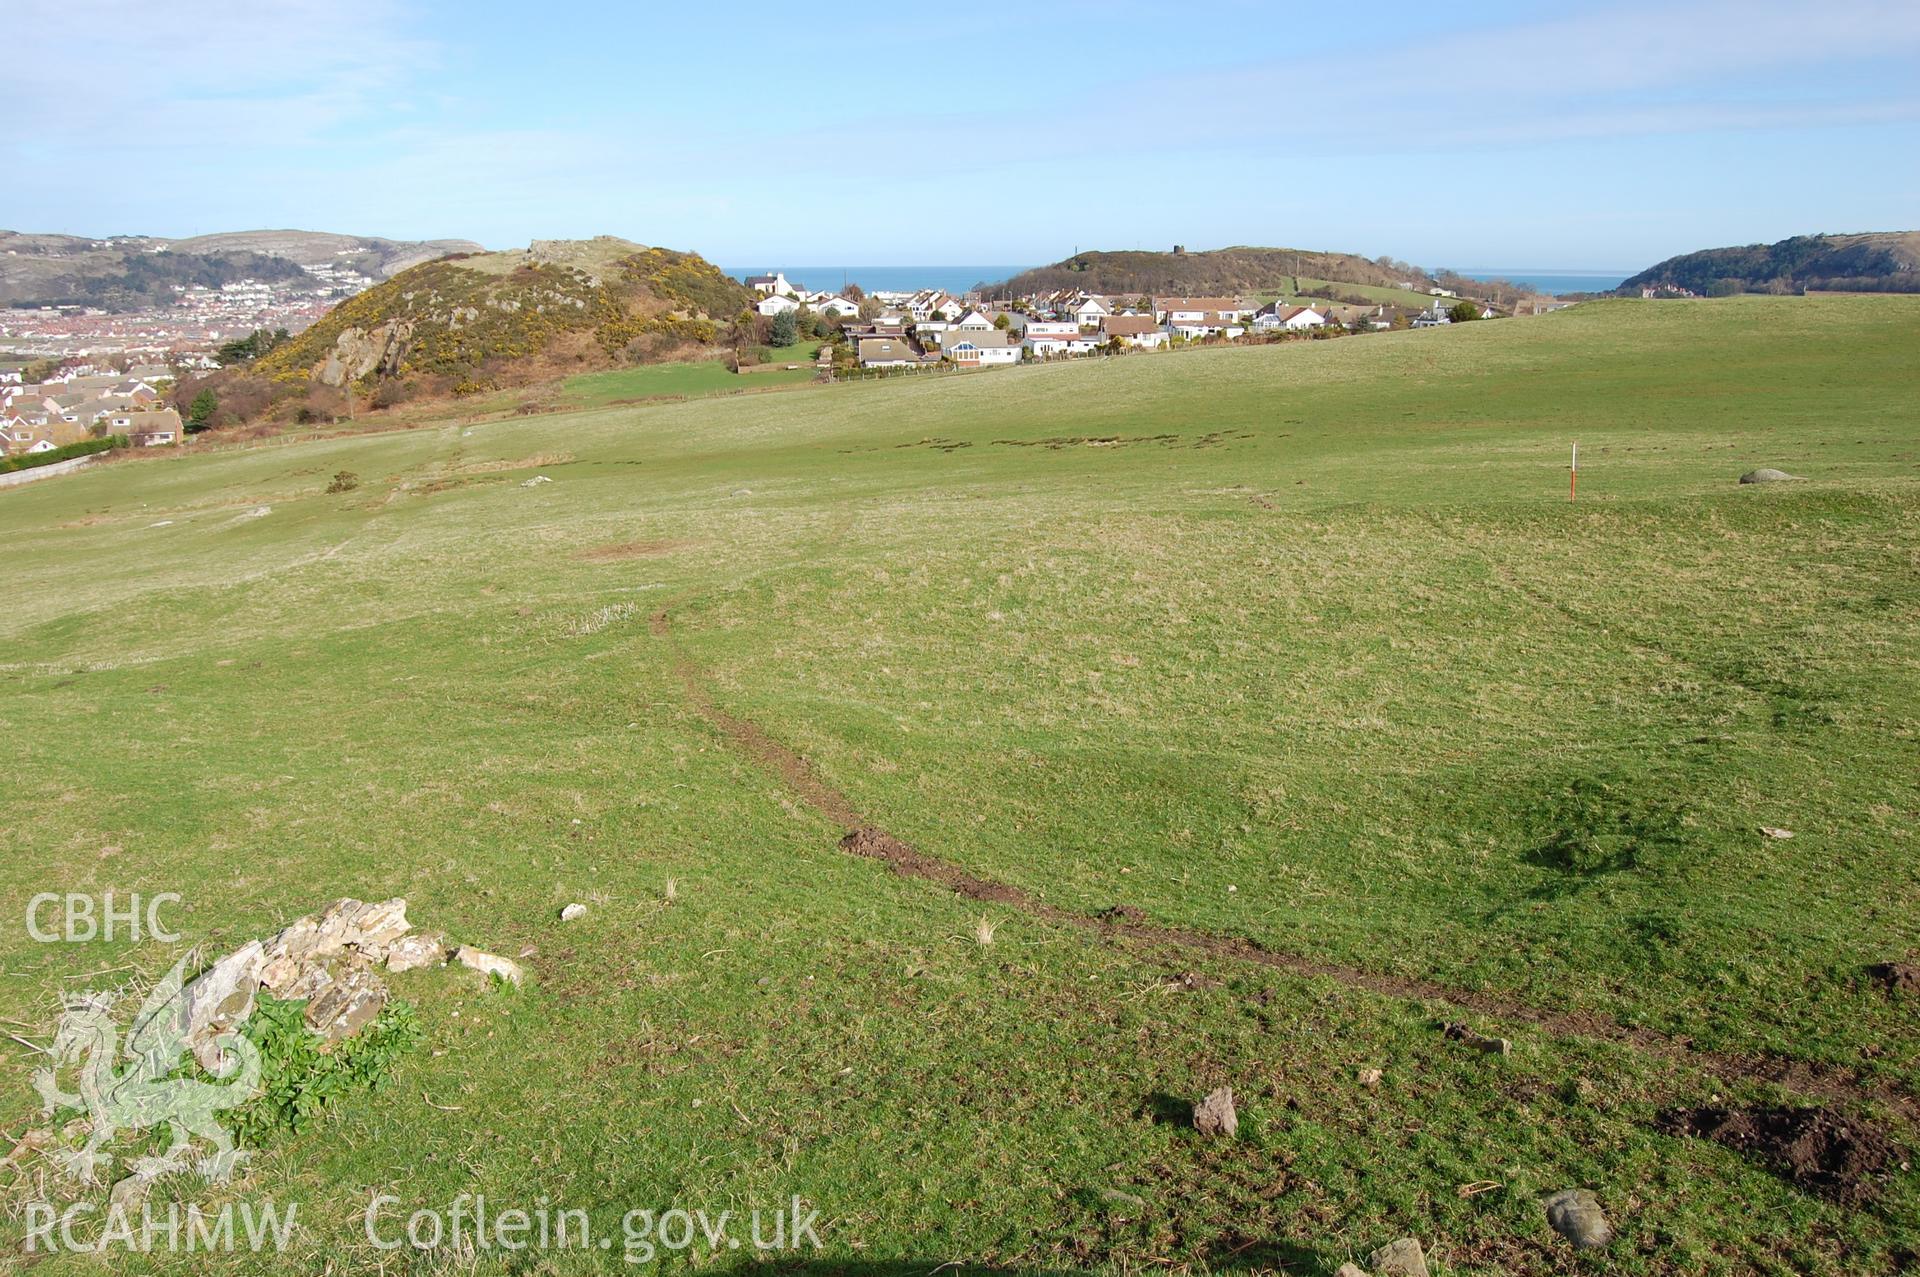 Digital photograph from an archaeological assessment of Deganwy Castle, carried out by Gwynedd Archaeological Trust, 2009. Vardre North settlement.